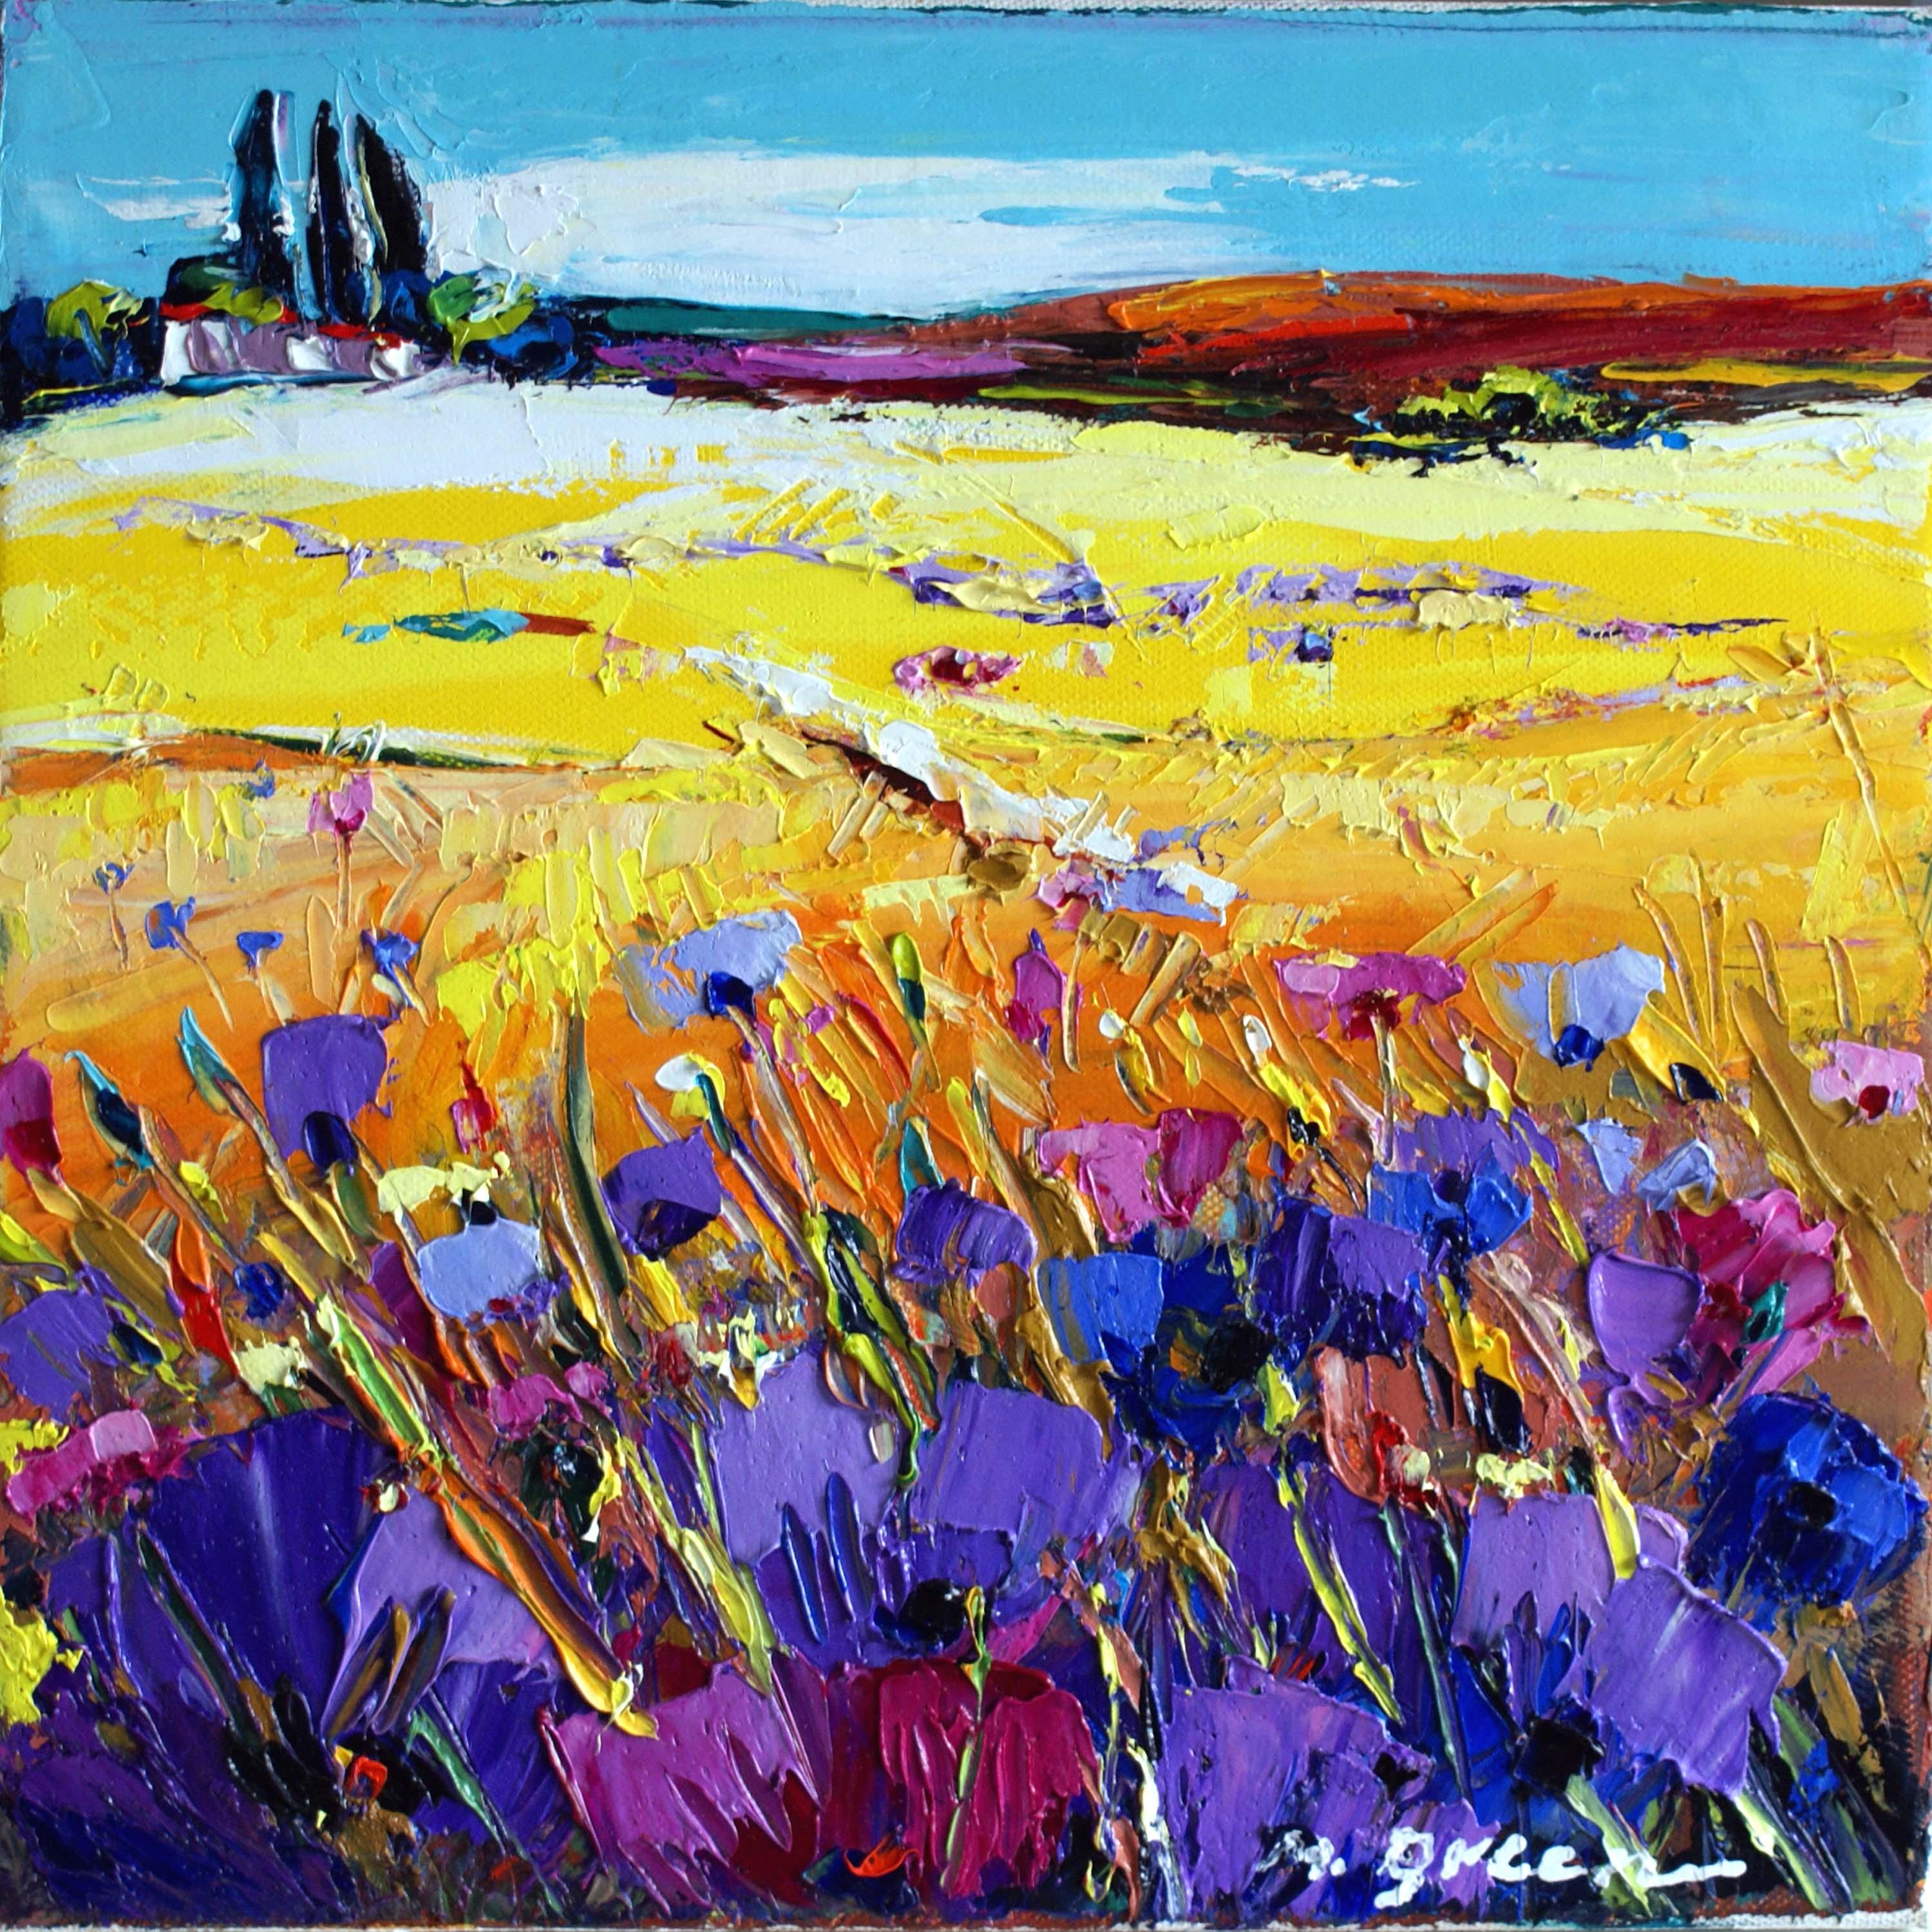 Maya Green Abstract Painting - Landscape With Purple Flowers Oil on Canvas Palette Knife 12 x 12" Landscape 